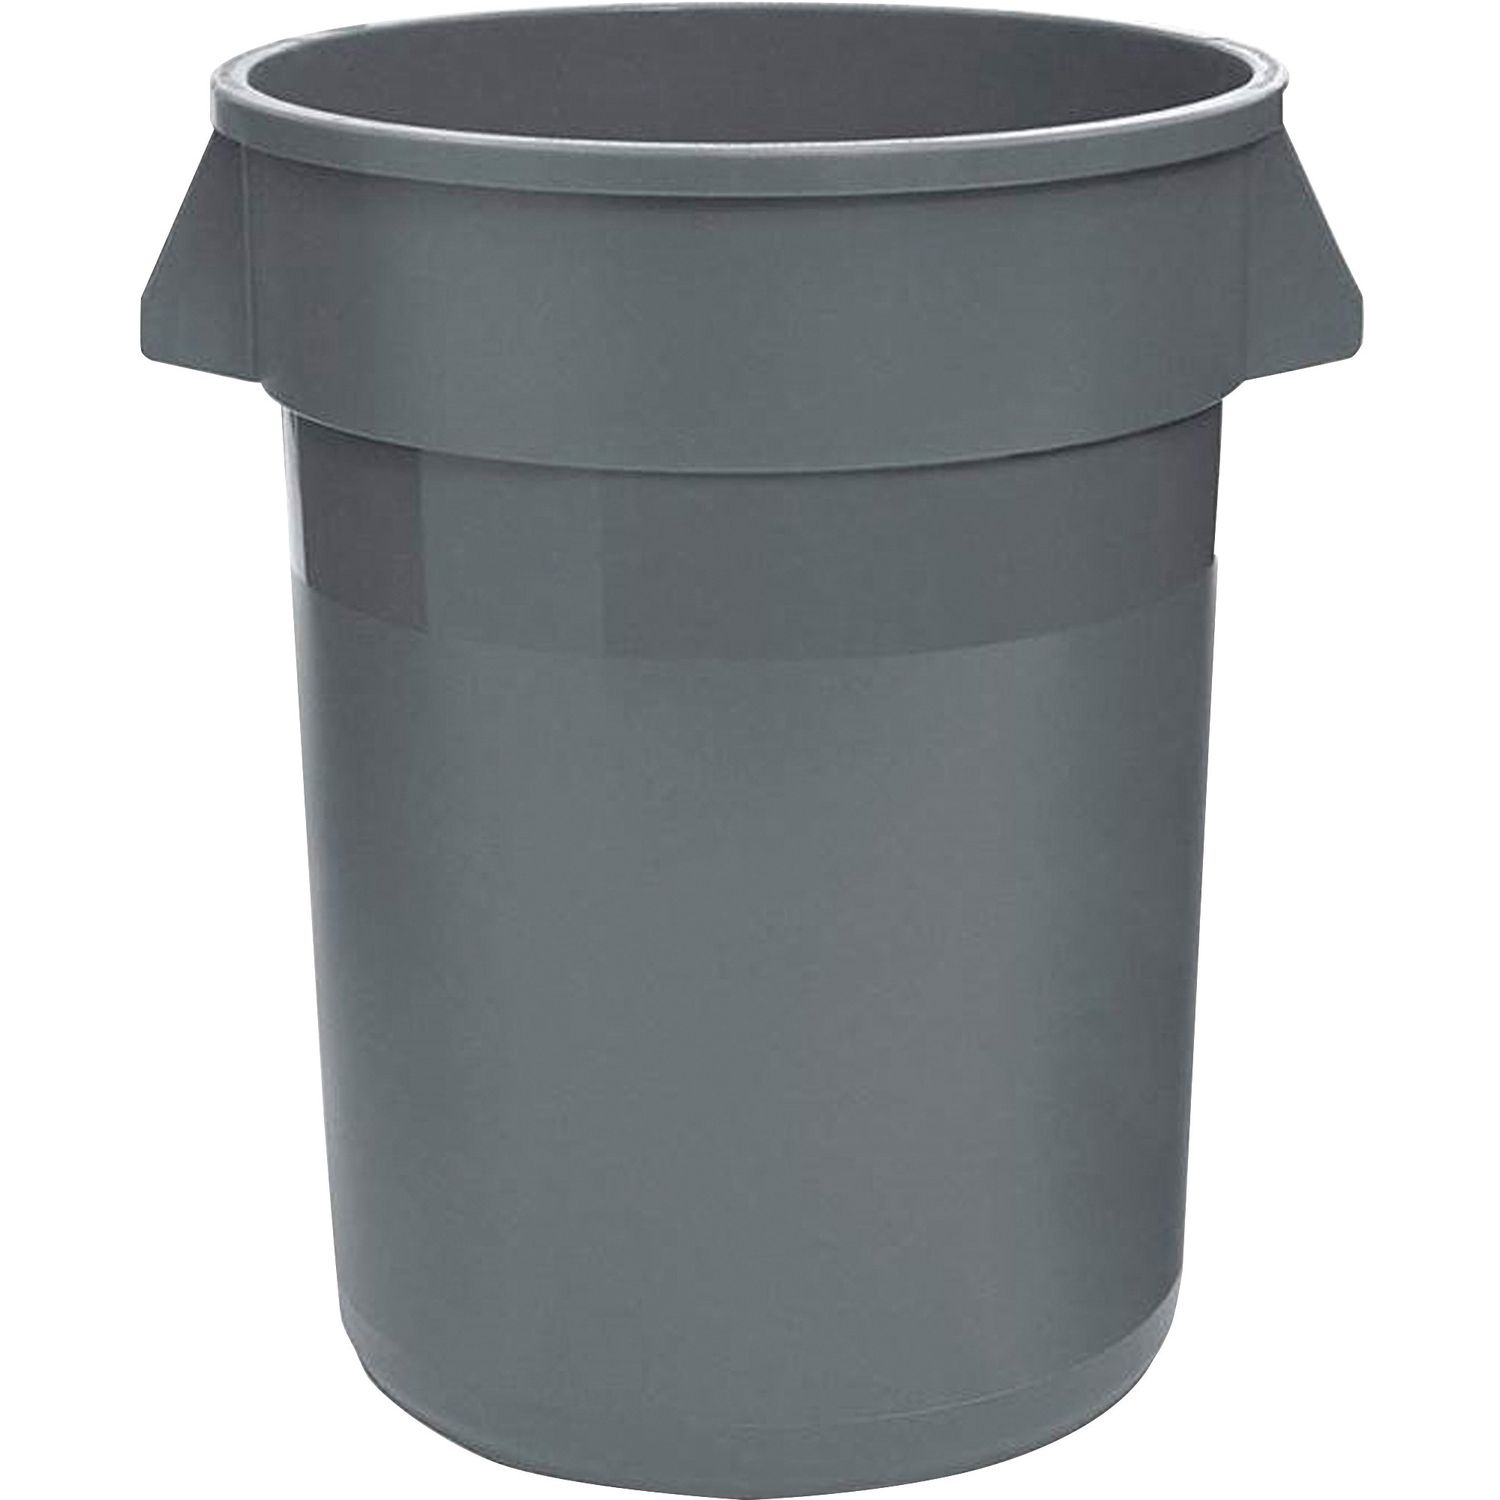 Heavy-Duty Waste Container 32 gal Capacity, Jam-free, Plastic, Gray, 1